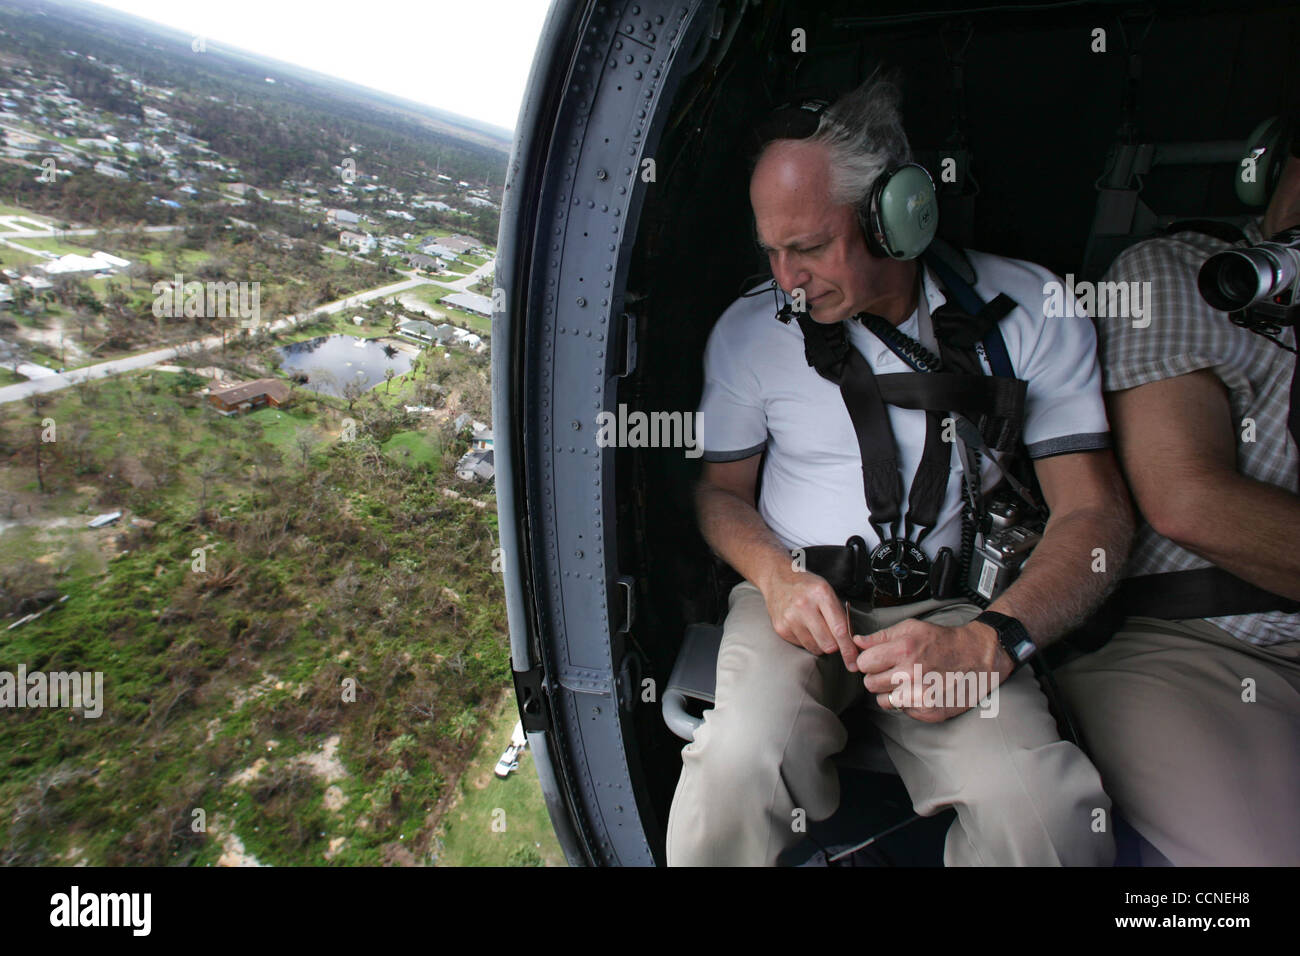 092904 hur ae- Director of the National Hurricane Center, Max Mayfield, flys over Wabasso to get a first hand look at the damage caused by hurricanes Jeanne and Frances. Staff photo Allen Eyestone. Stock Photo